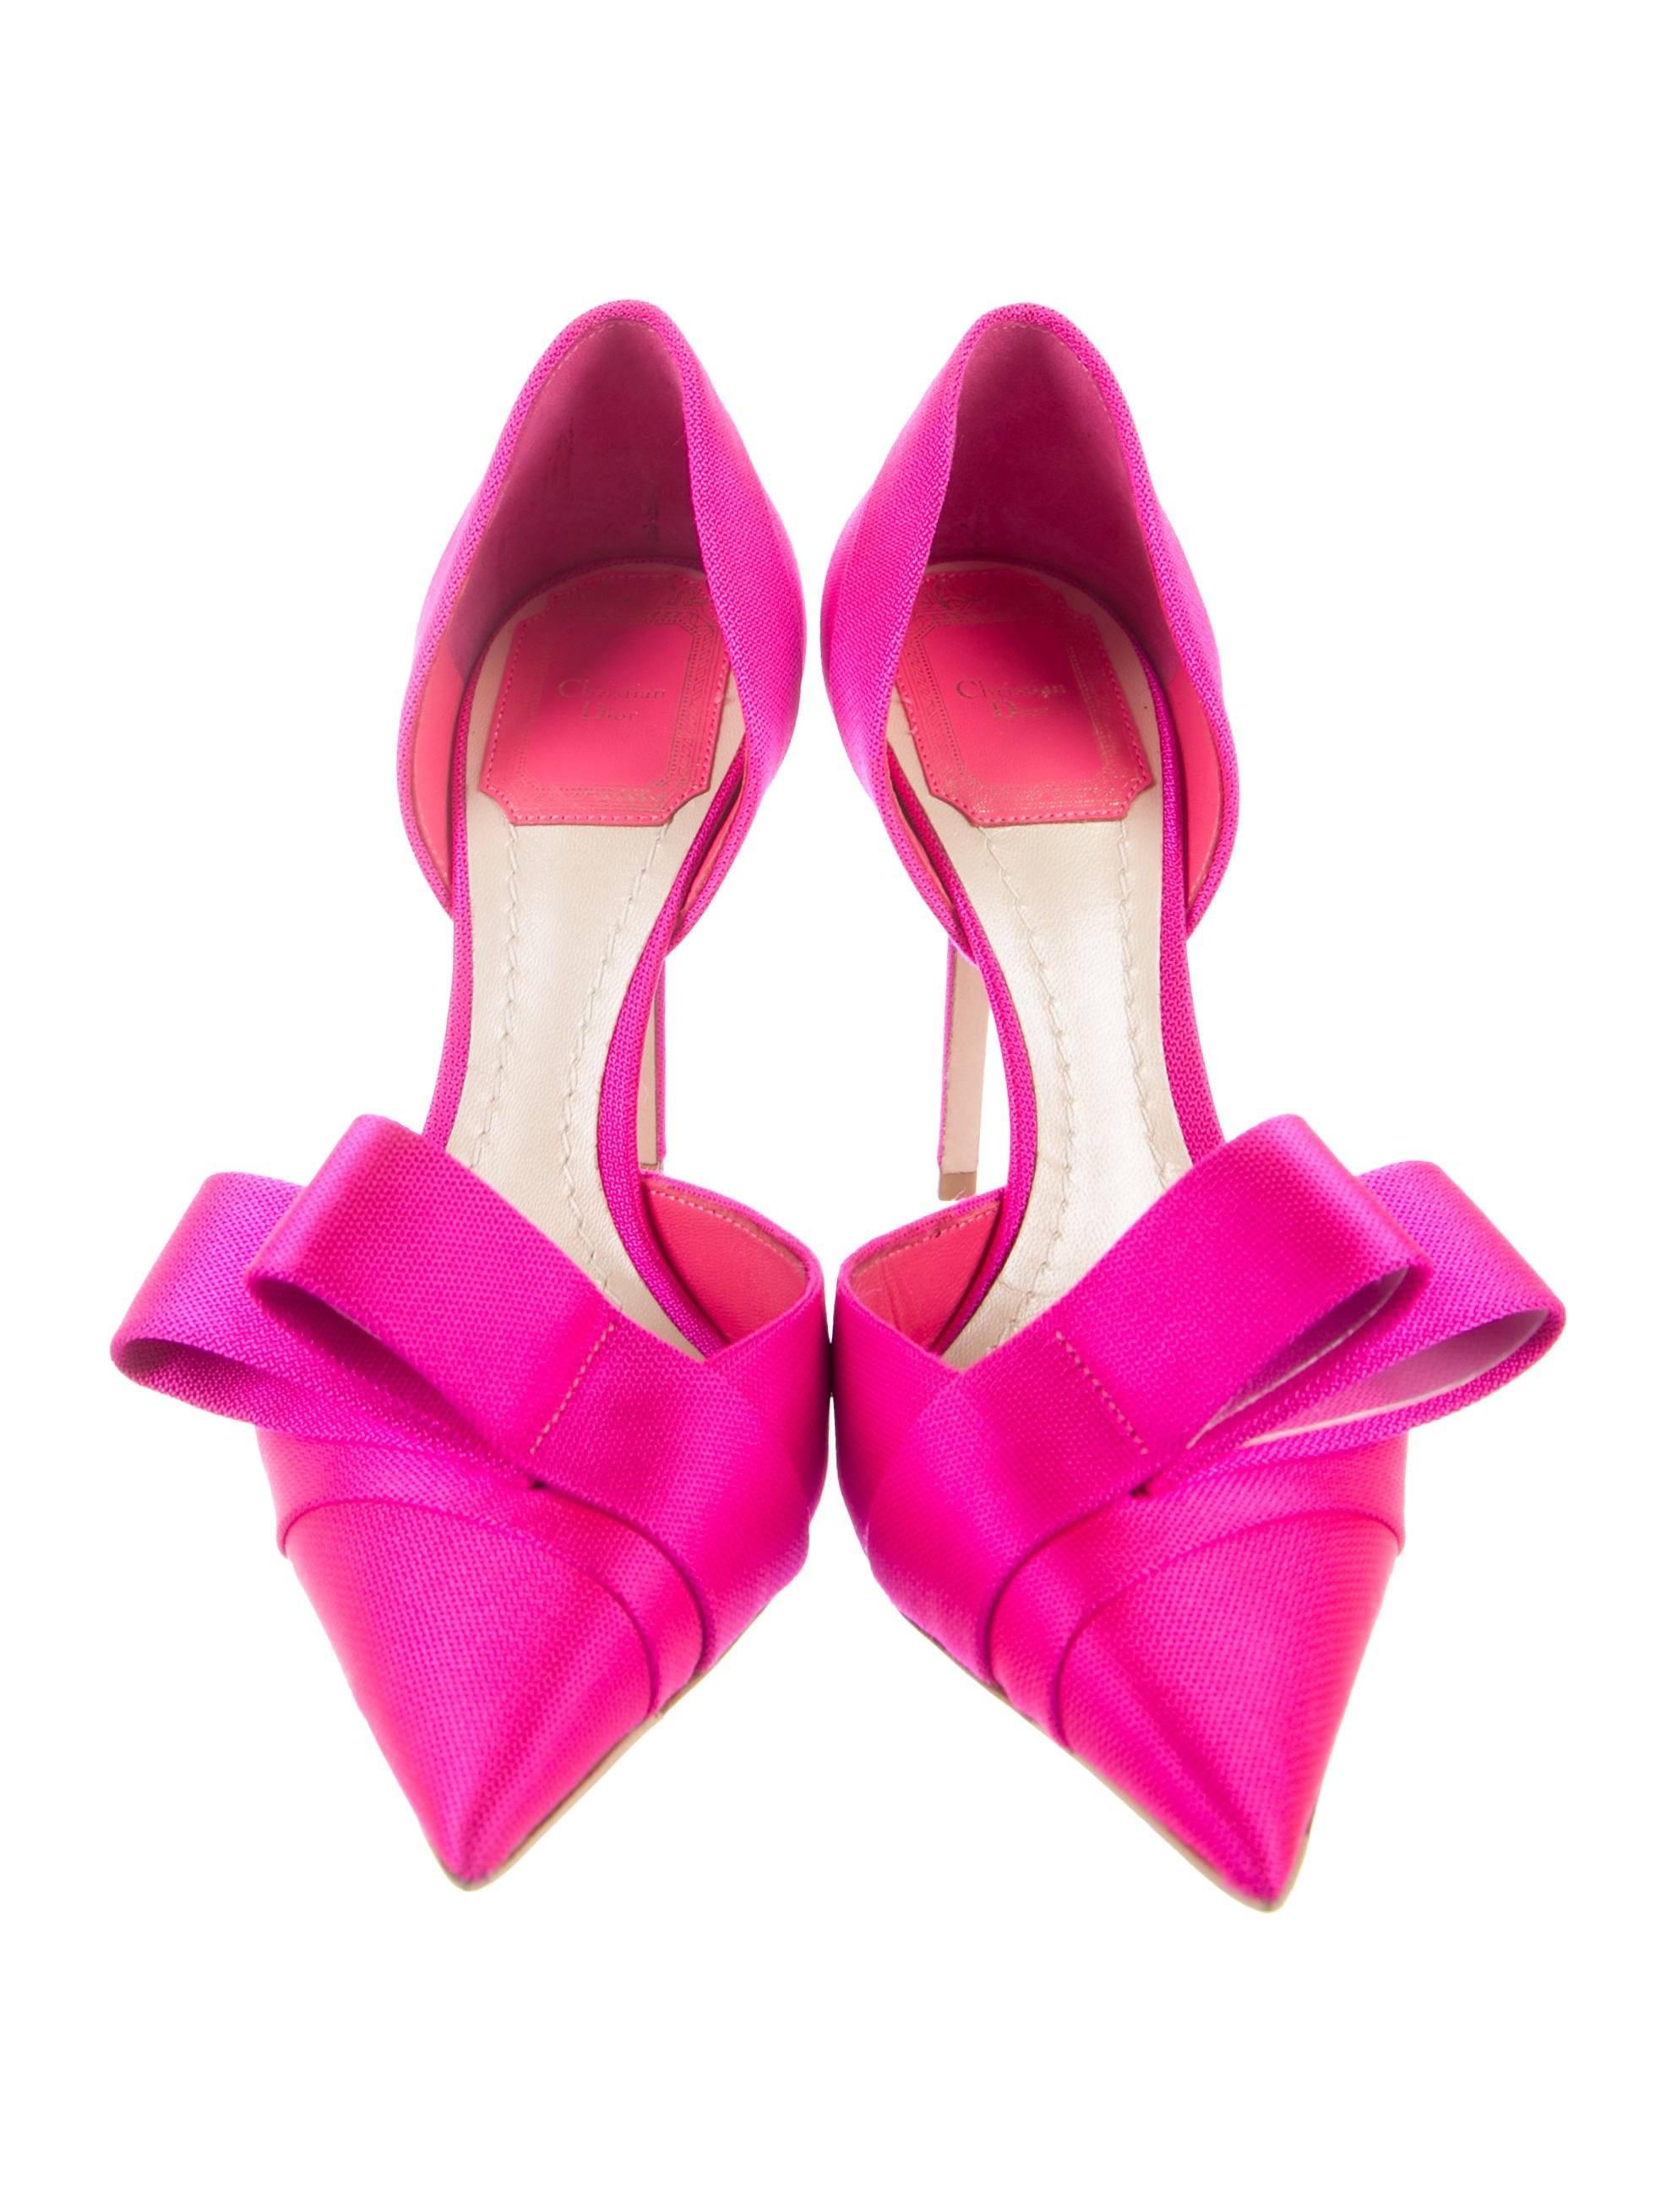 Christian Dior New Hot Pink Canvas Evening Pumps Heels

SIZE IT 36
Canvas
Slip on 
Made in Italy
Heels height 4"